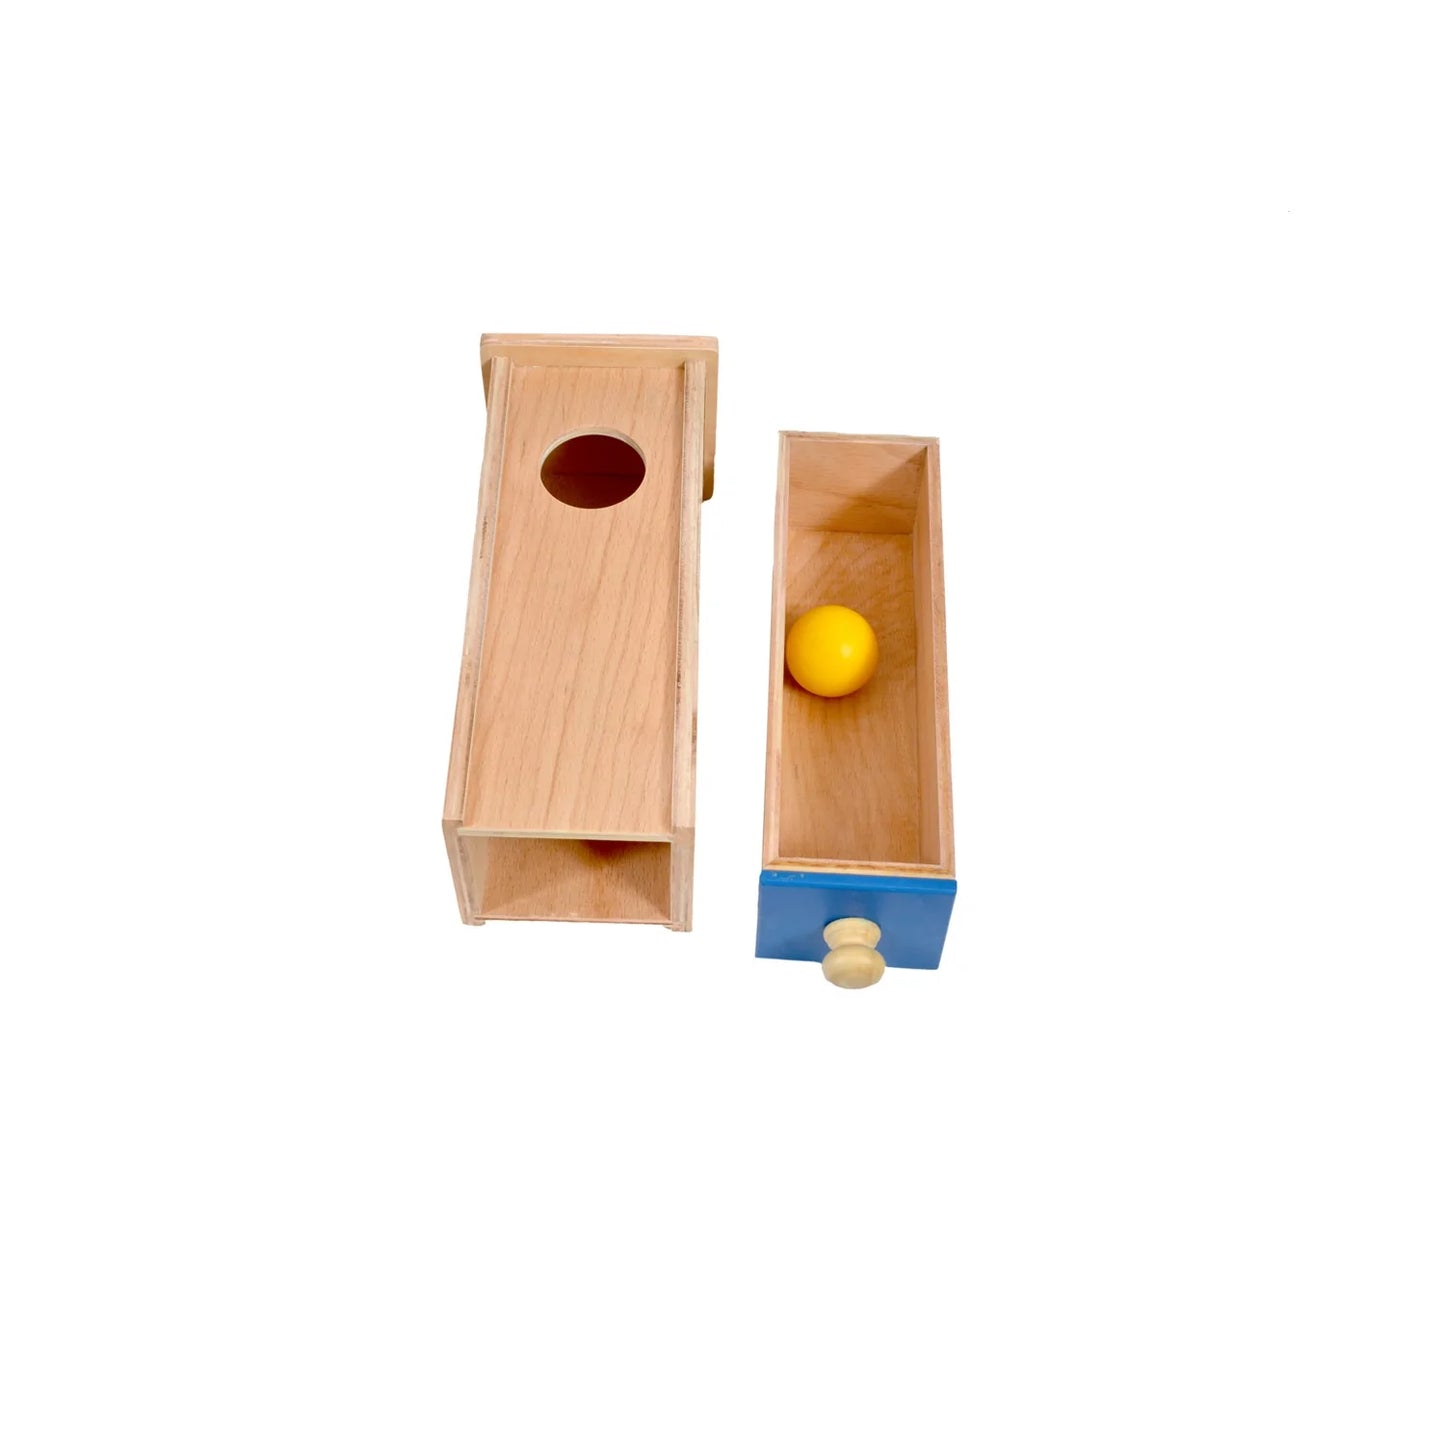 Object Permanence Learning Box with Drawer